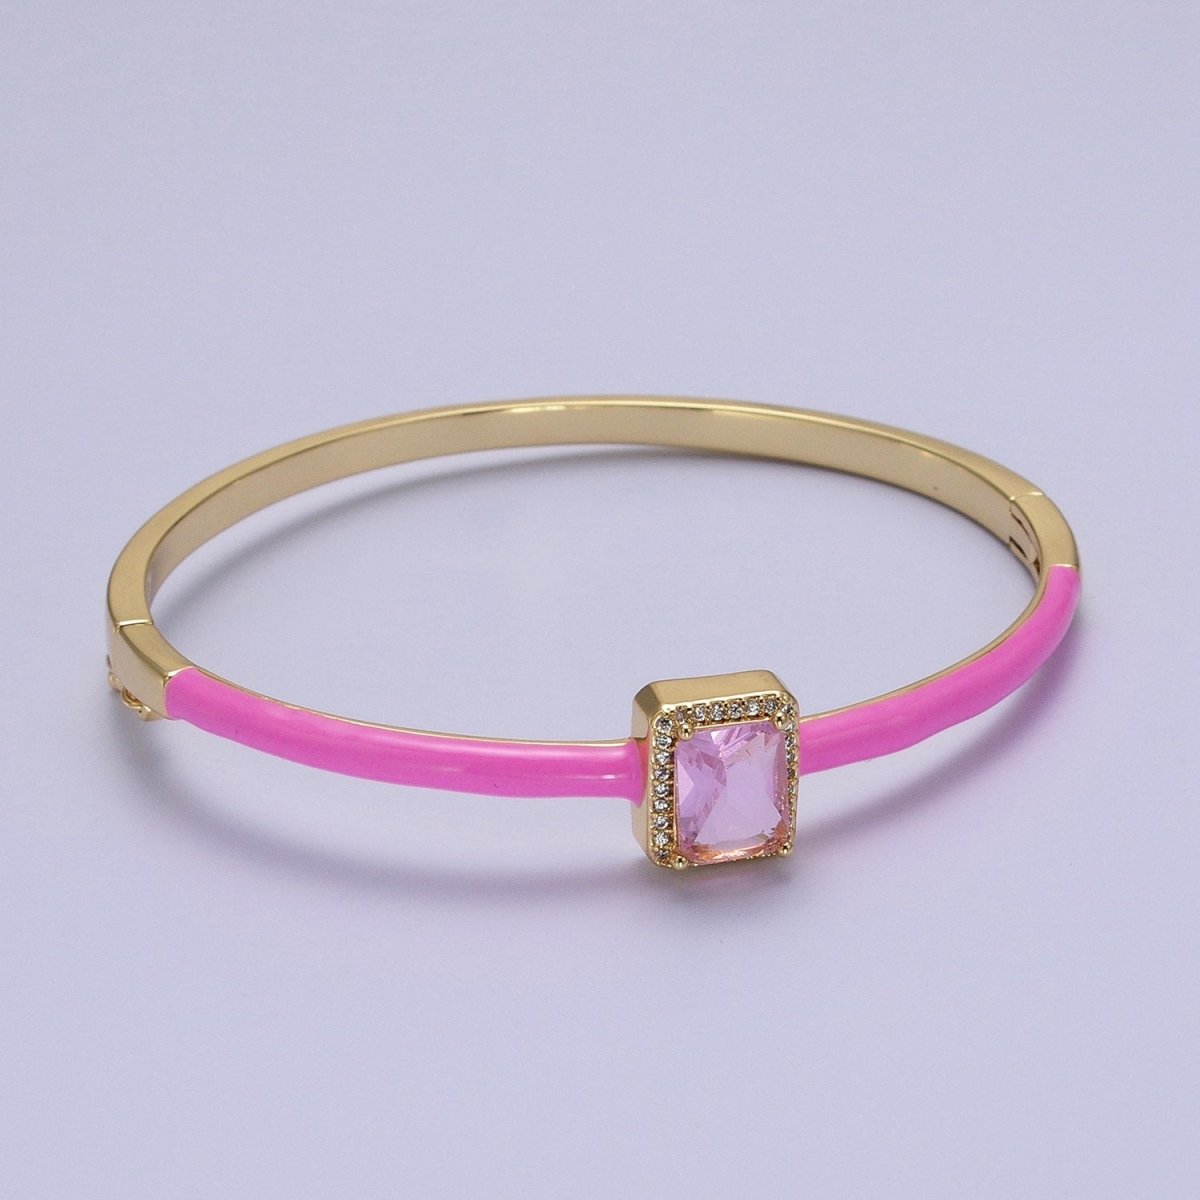 Barbie core Gold Filled Baguette White, Green, Pink Micro Paved Enamel Gold Bangle Bracelet | WA-1354 - WA-1356 Clearance Pricing - DLUXCA